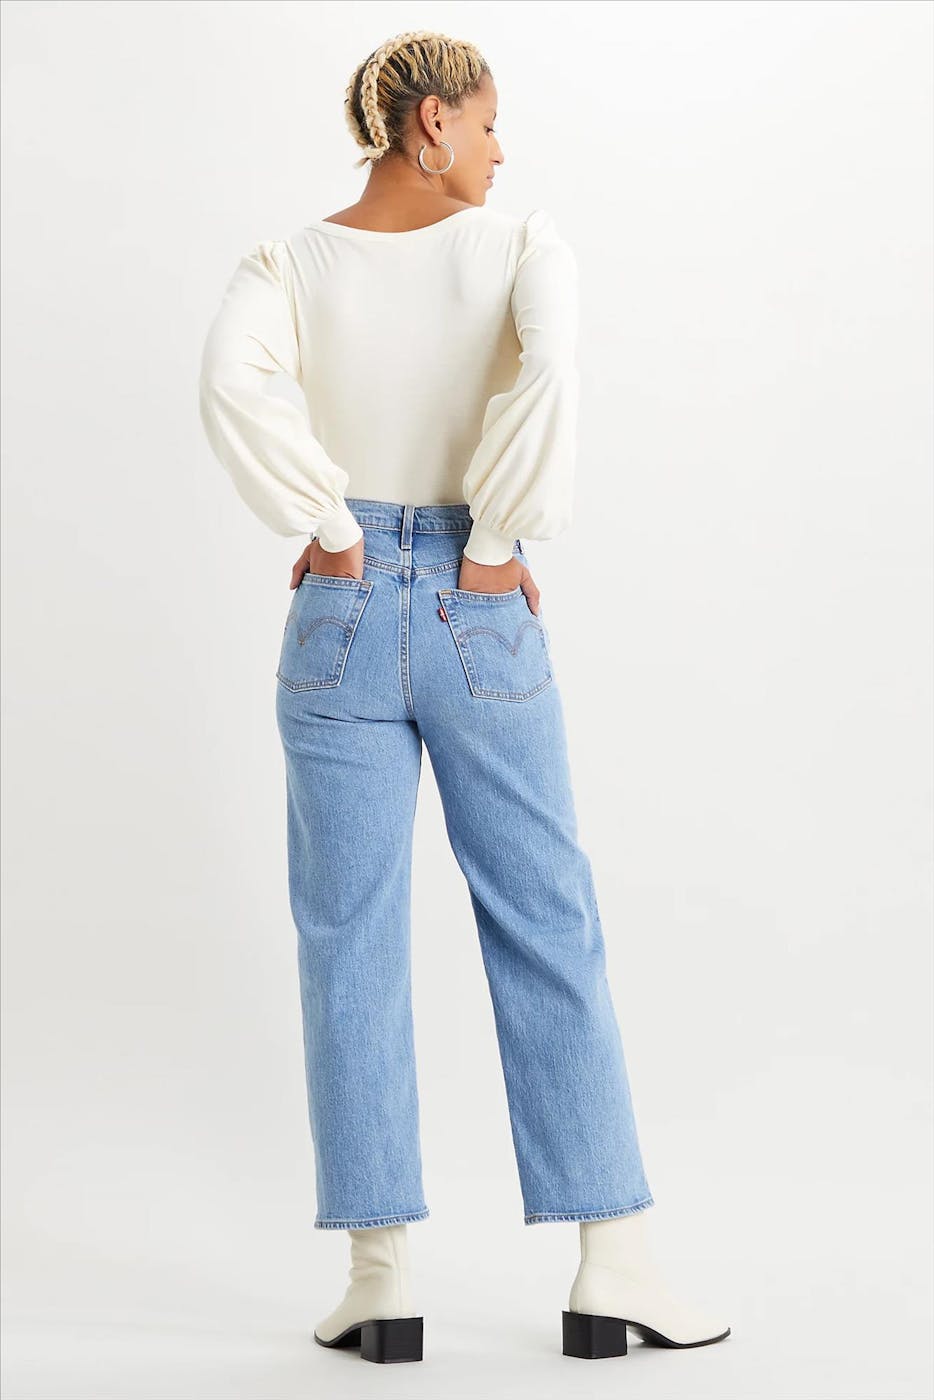 Levi's - Lichtblauwe Ribcage Straight Ankle jeans